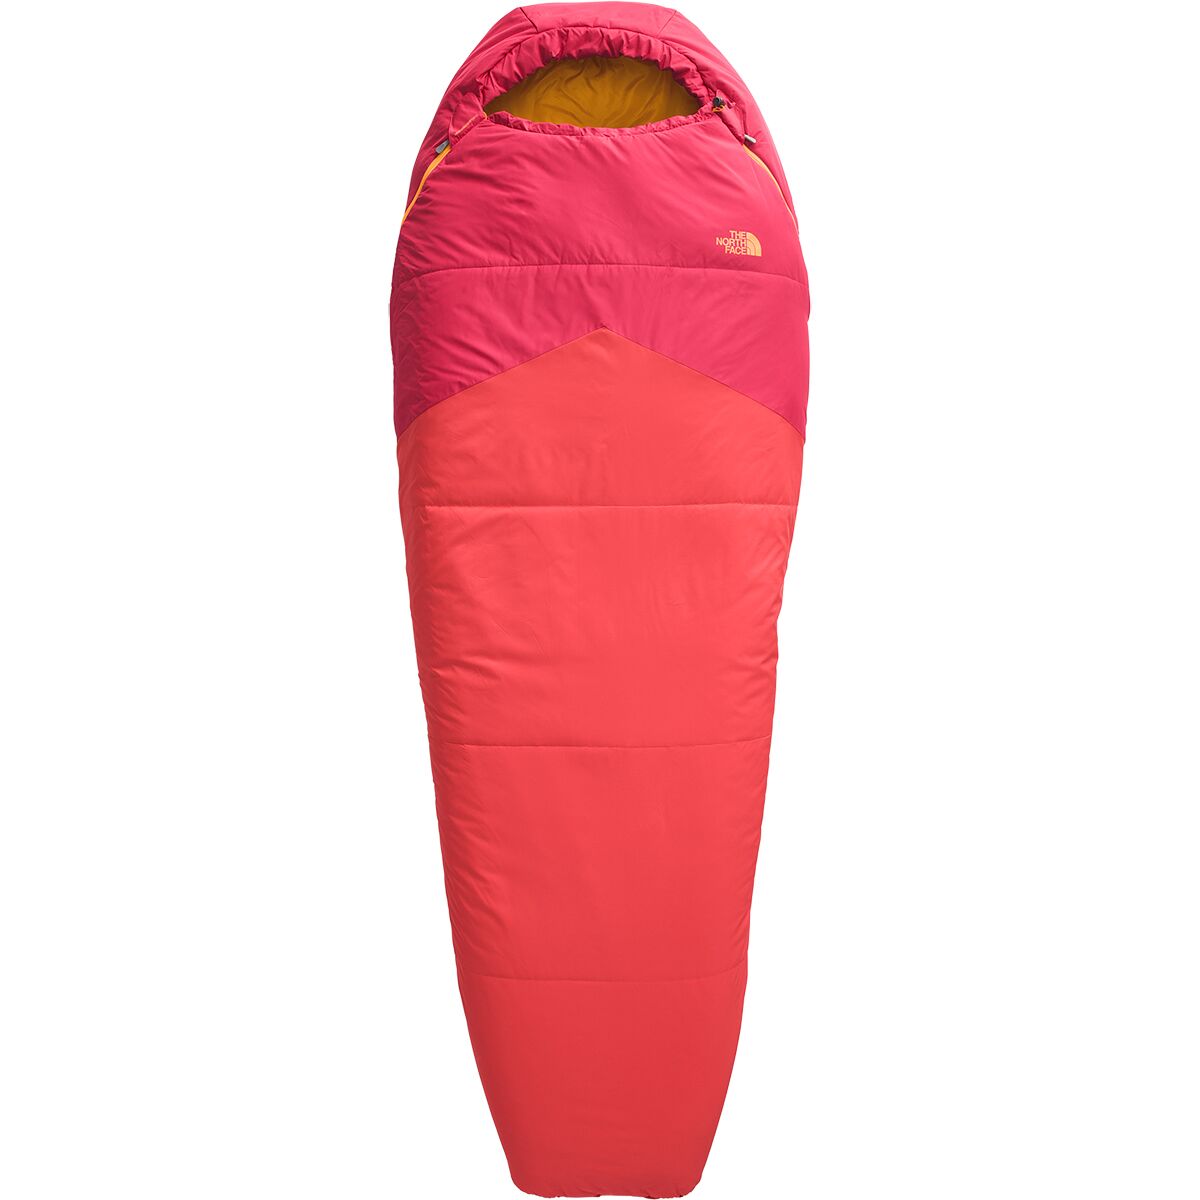 The North Face Wasatch Pro 55 Sleeping Bag: 55F Synthetic